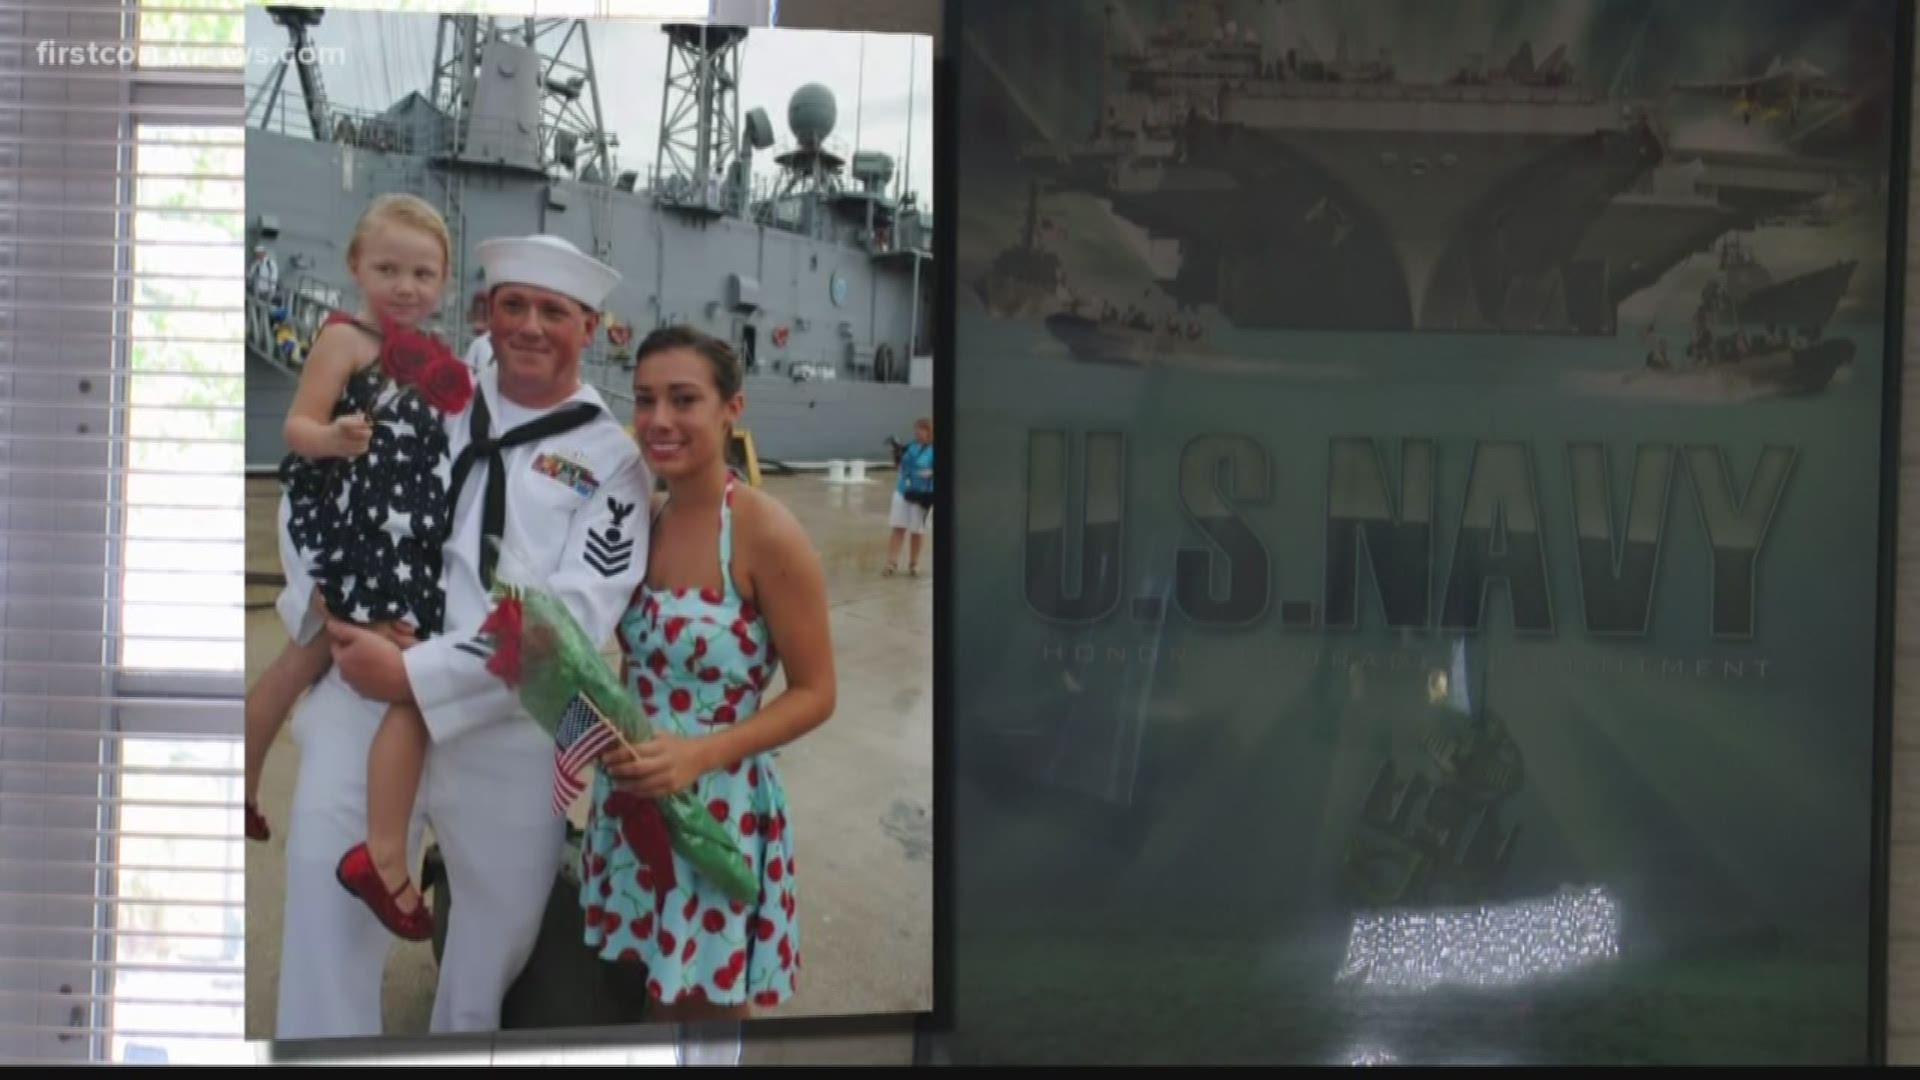 A young woman who graduated from Flagler College with funds from her stepfather's military service G.I. bill now owes nearly $40,000 plus interest.